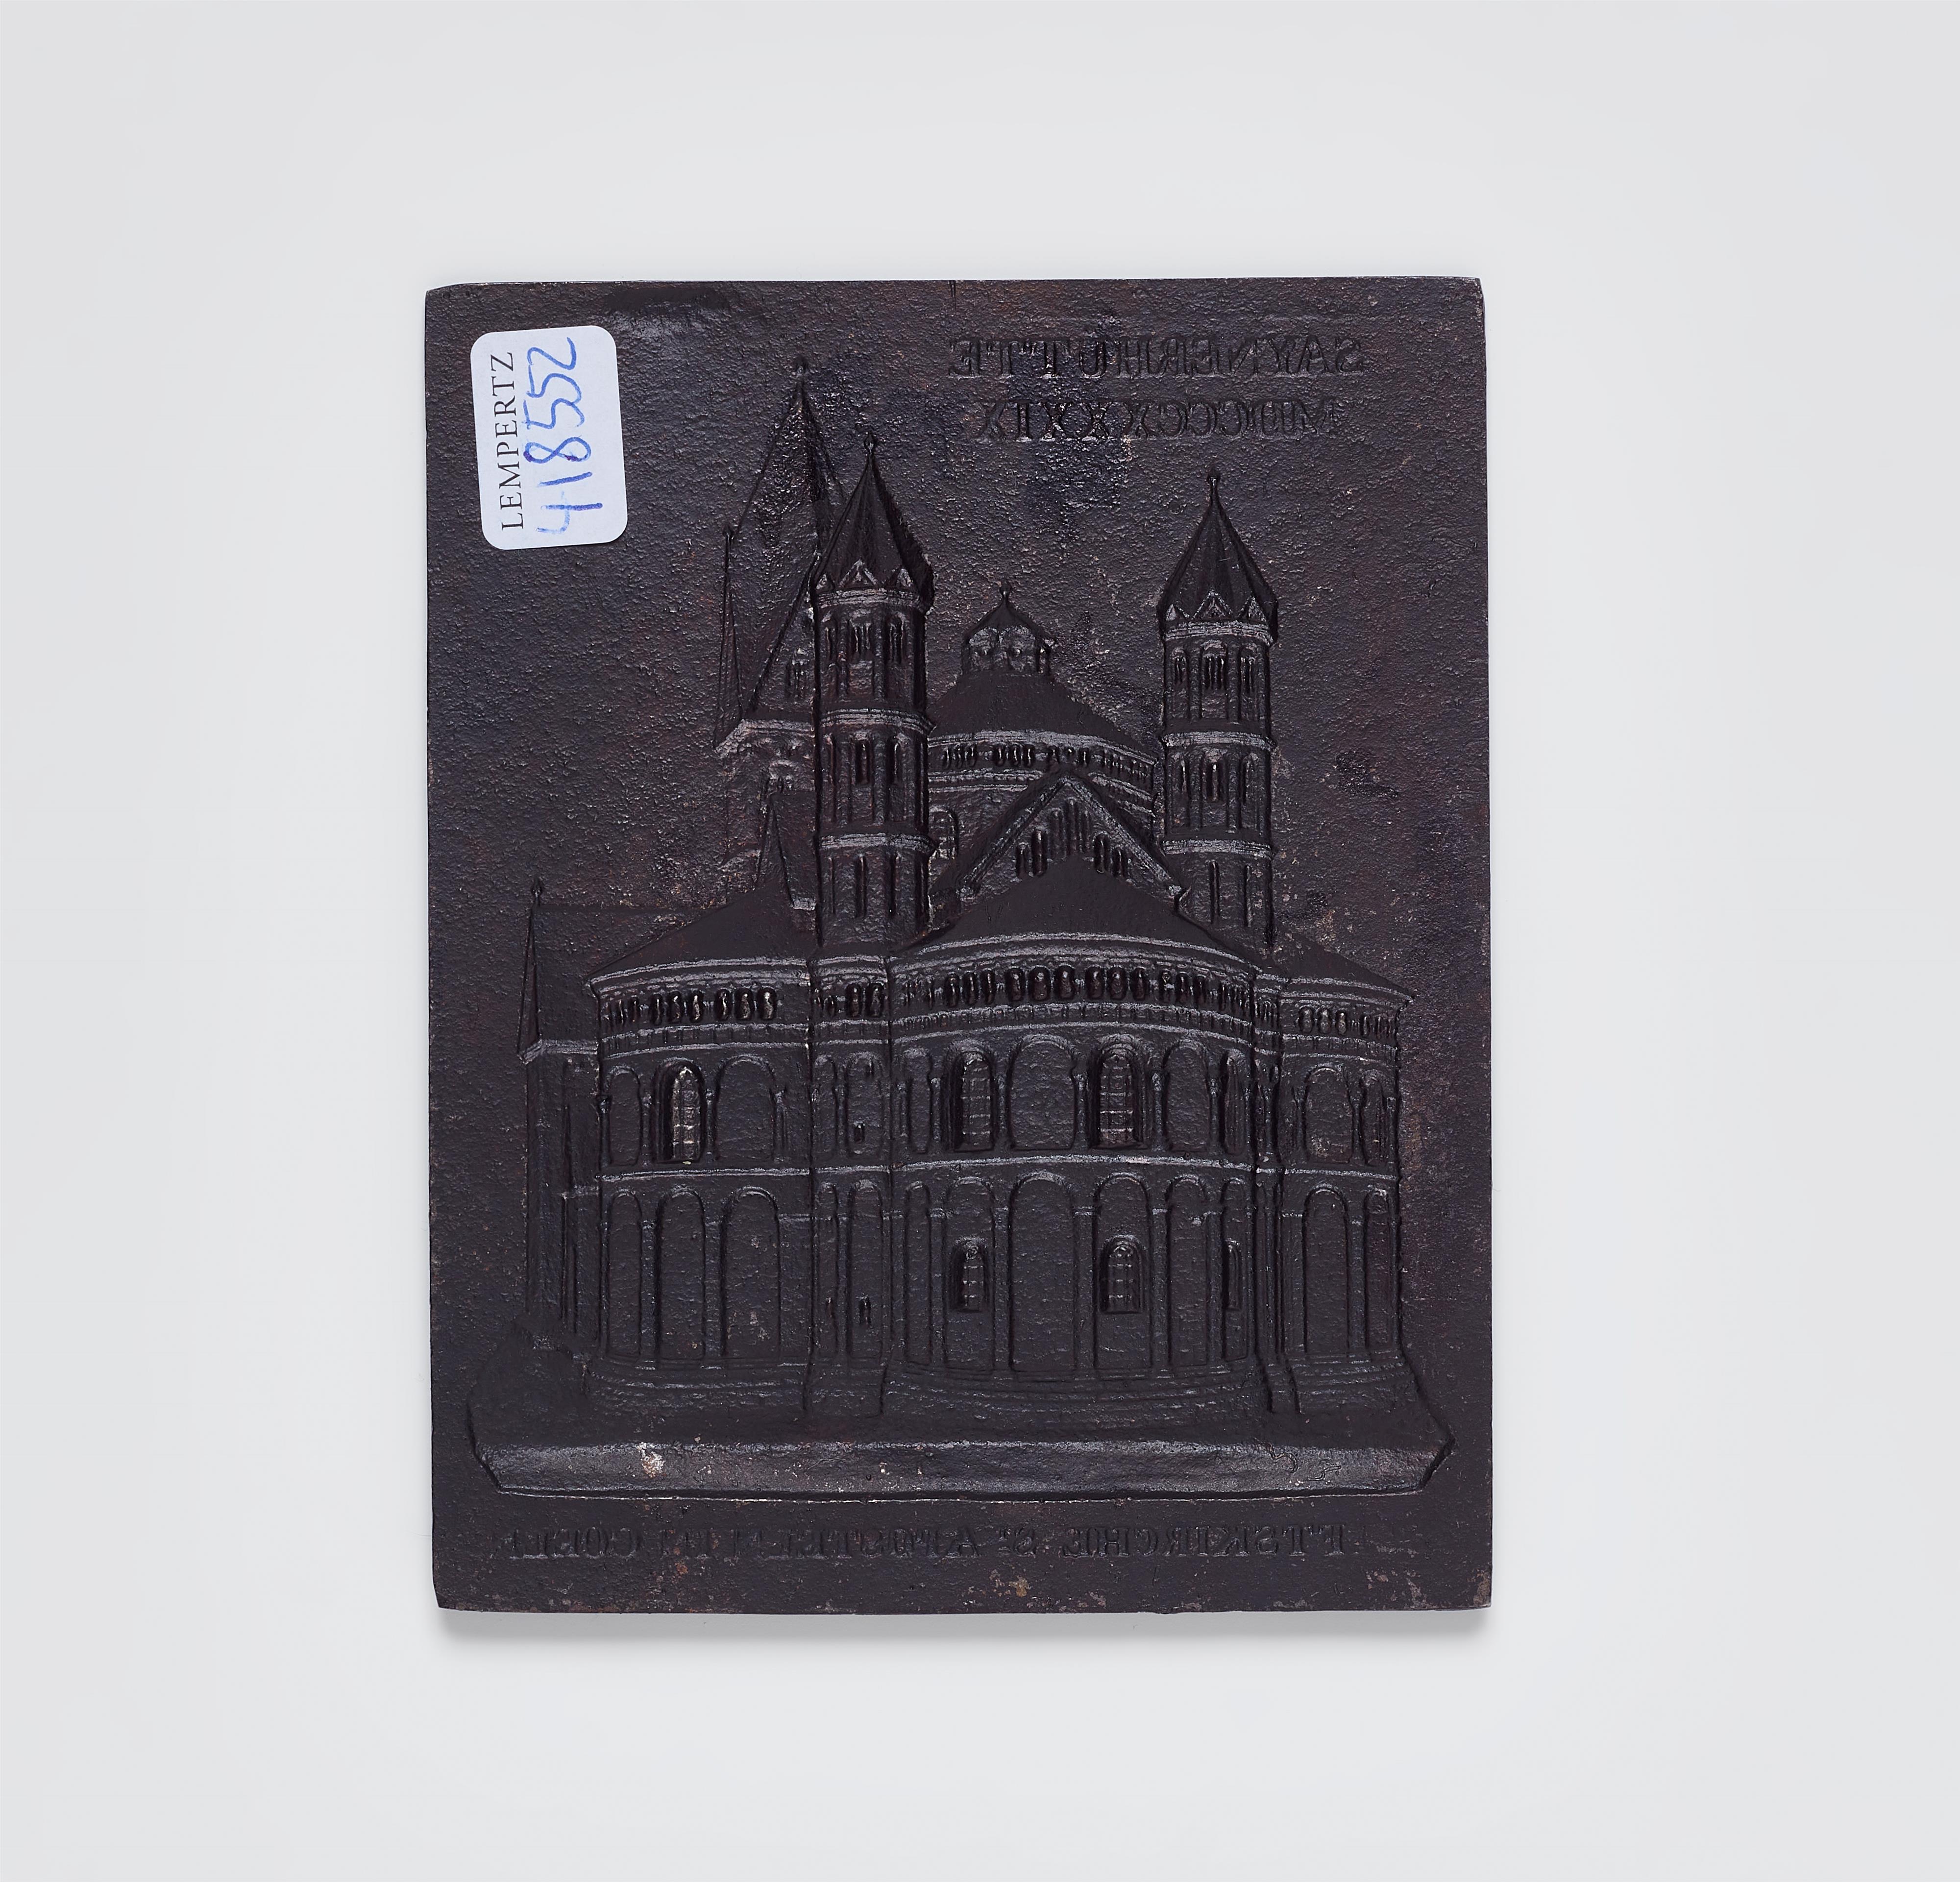 A cast iron New Year's plaque "Stiftskirche St. Aposteln in Coeln" - image-2